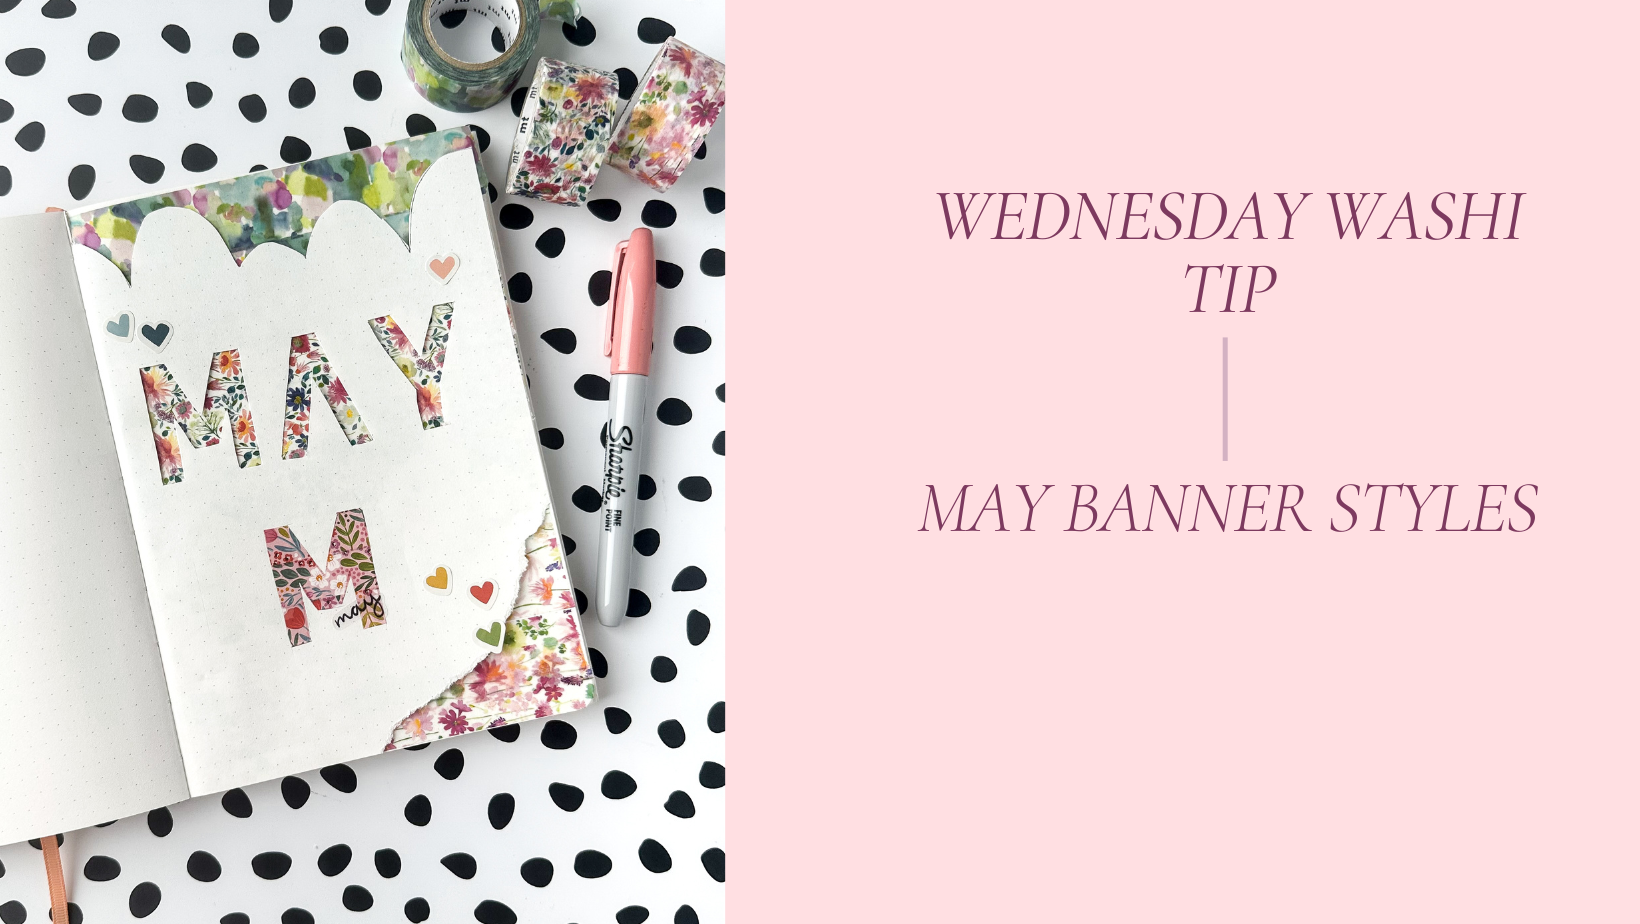 MAY BANNER STYLE - WEDNESDAY WASHI TIP